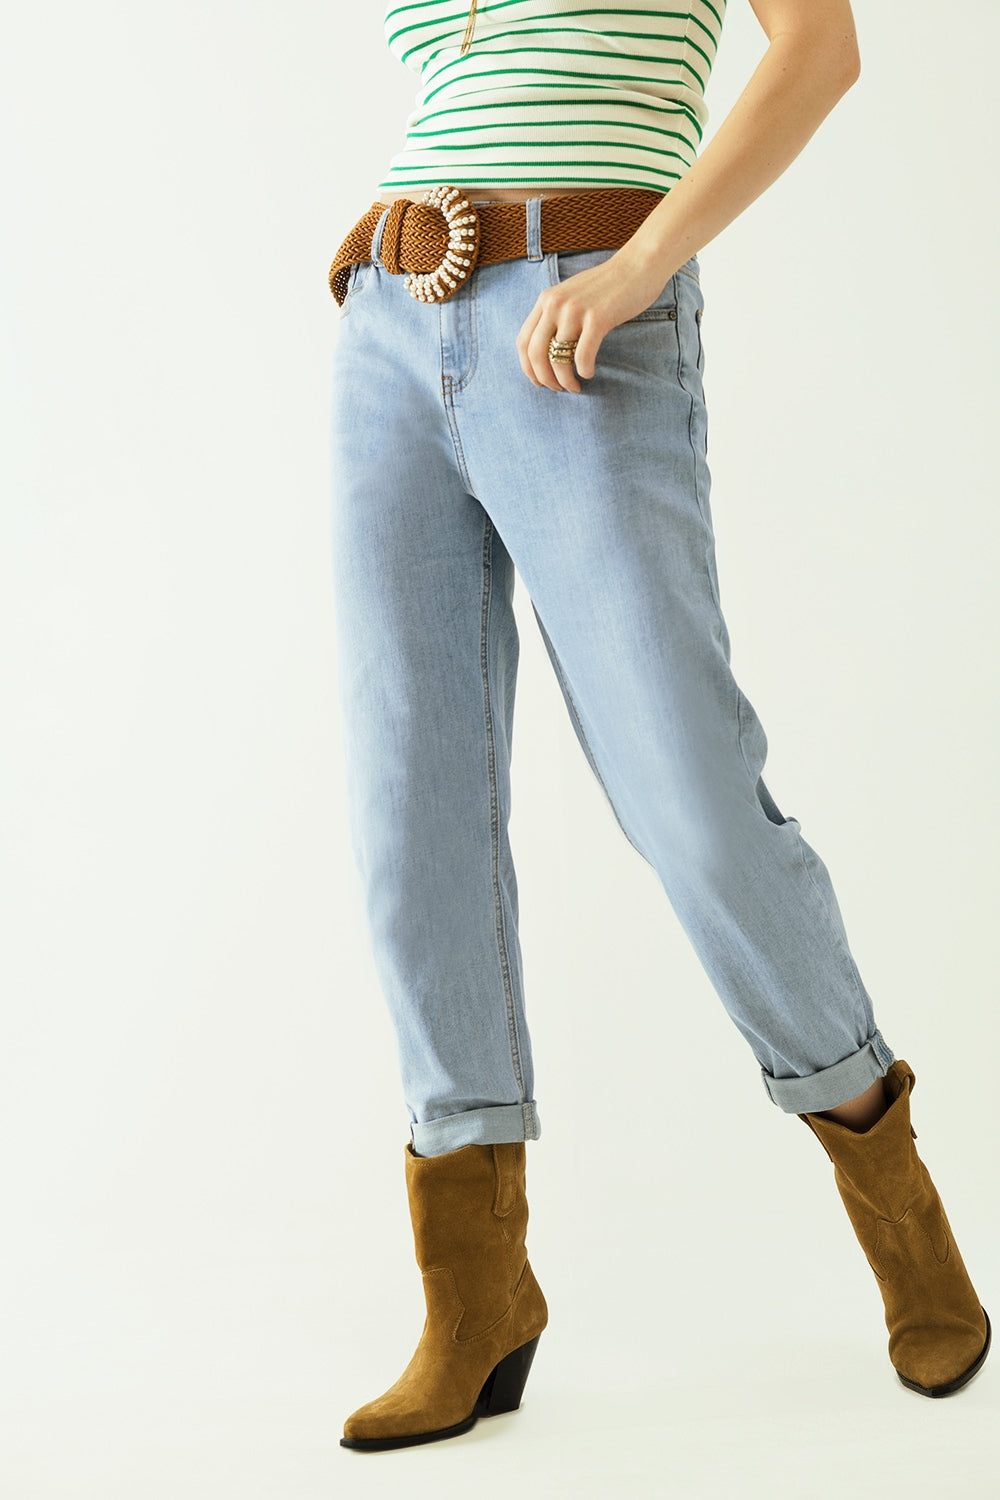 Boyfriend light blue jeans with stitching details on the edges